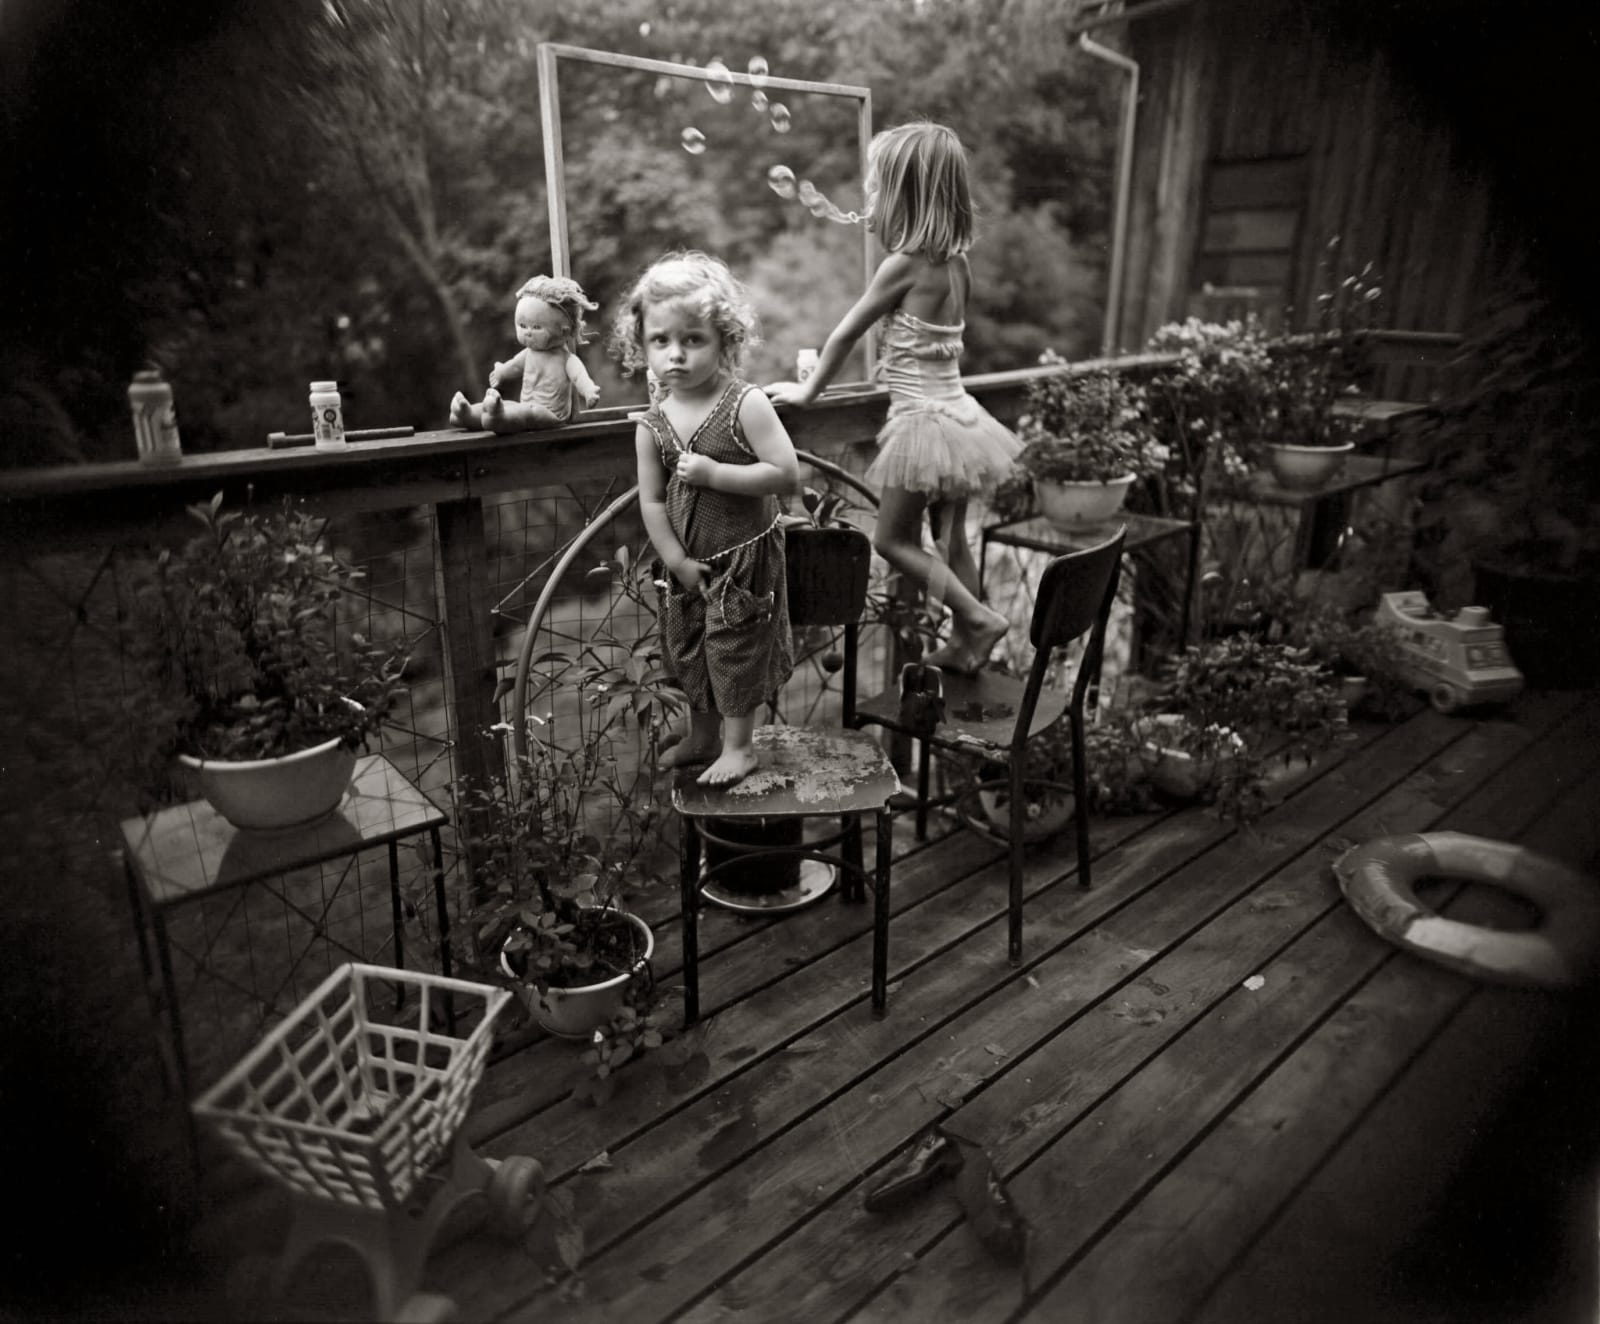 Virginia and Jessie blowing bubbles on outdoor porch, from the Immediate Family series, by Sally Mann